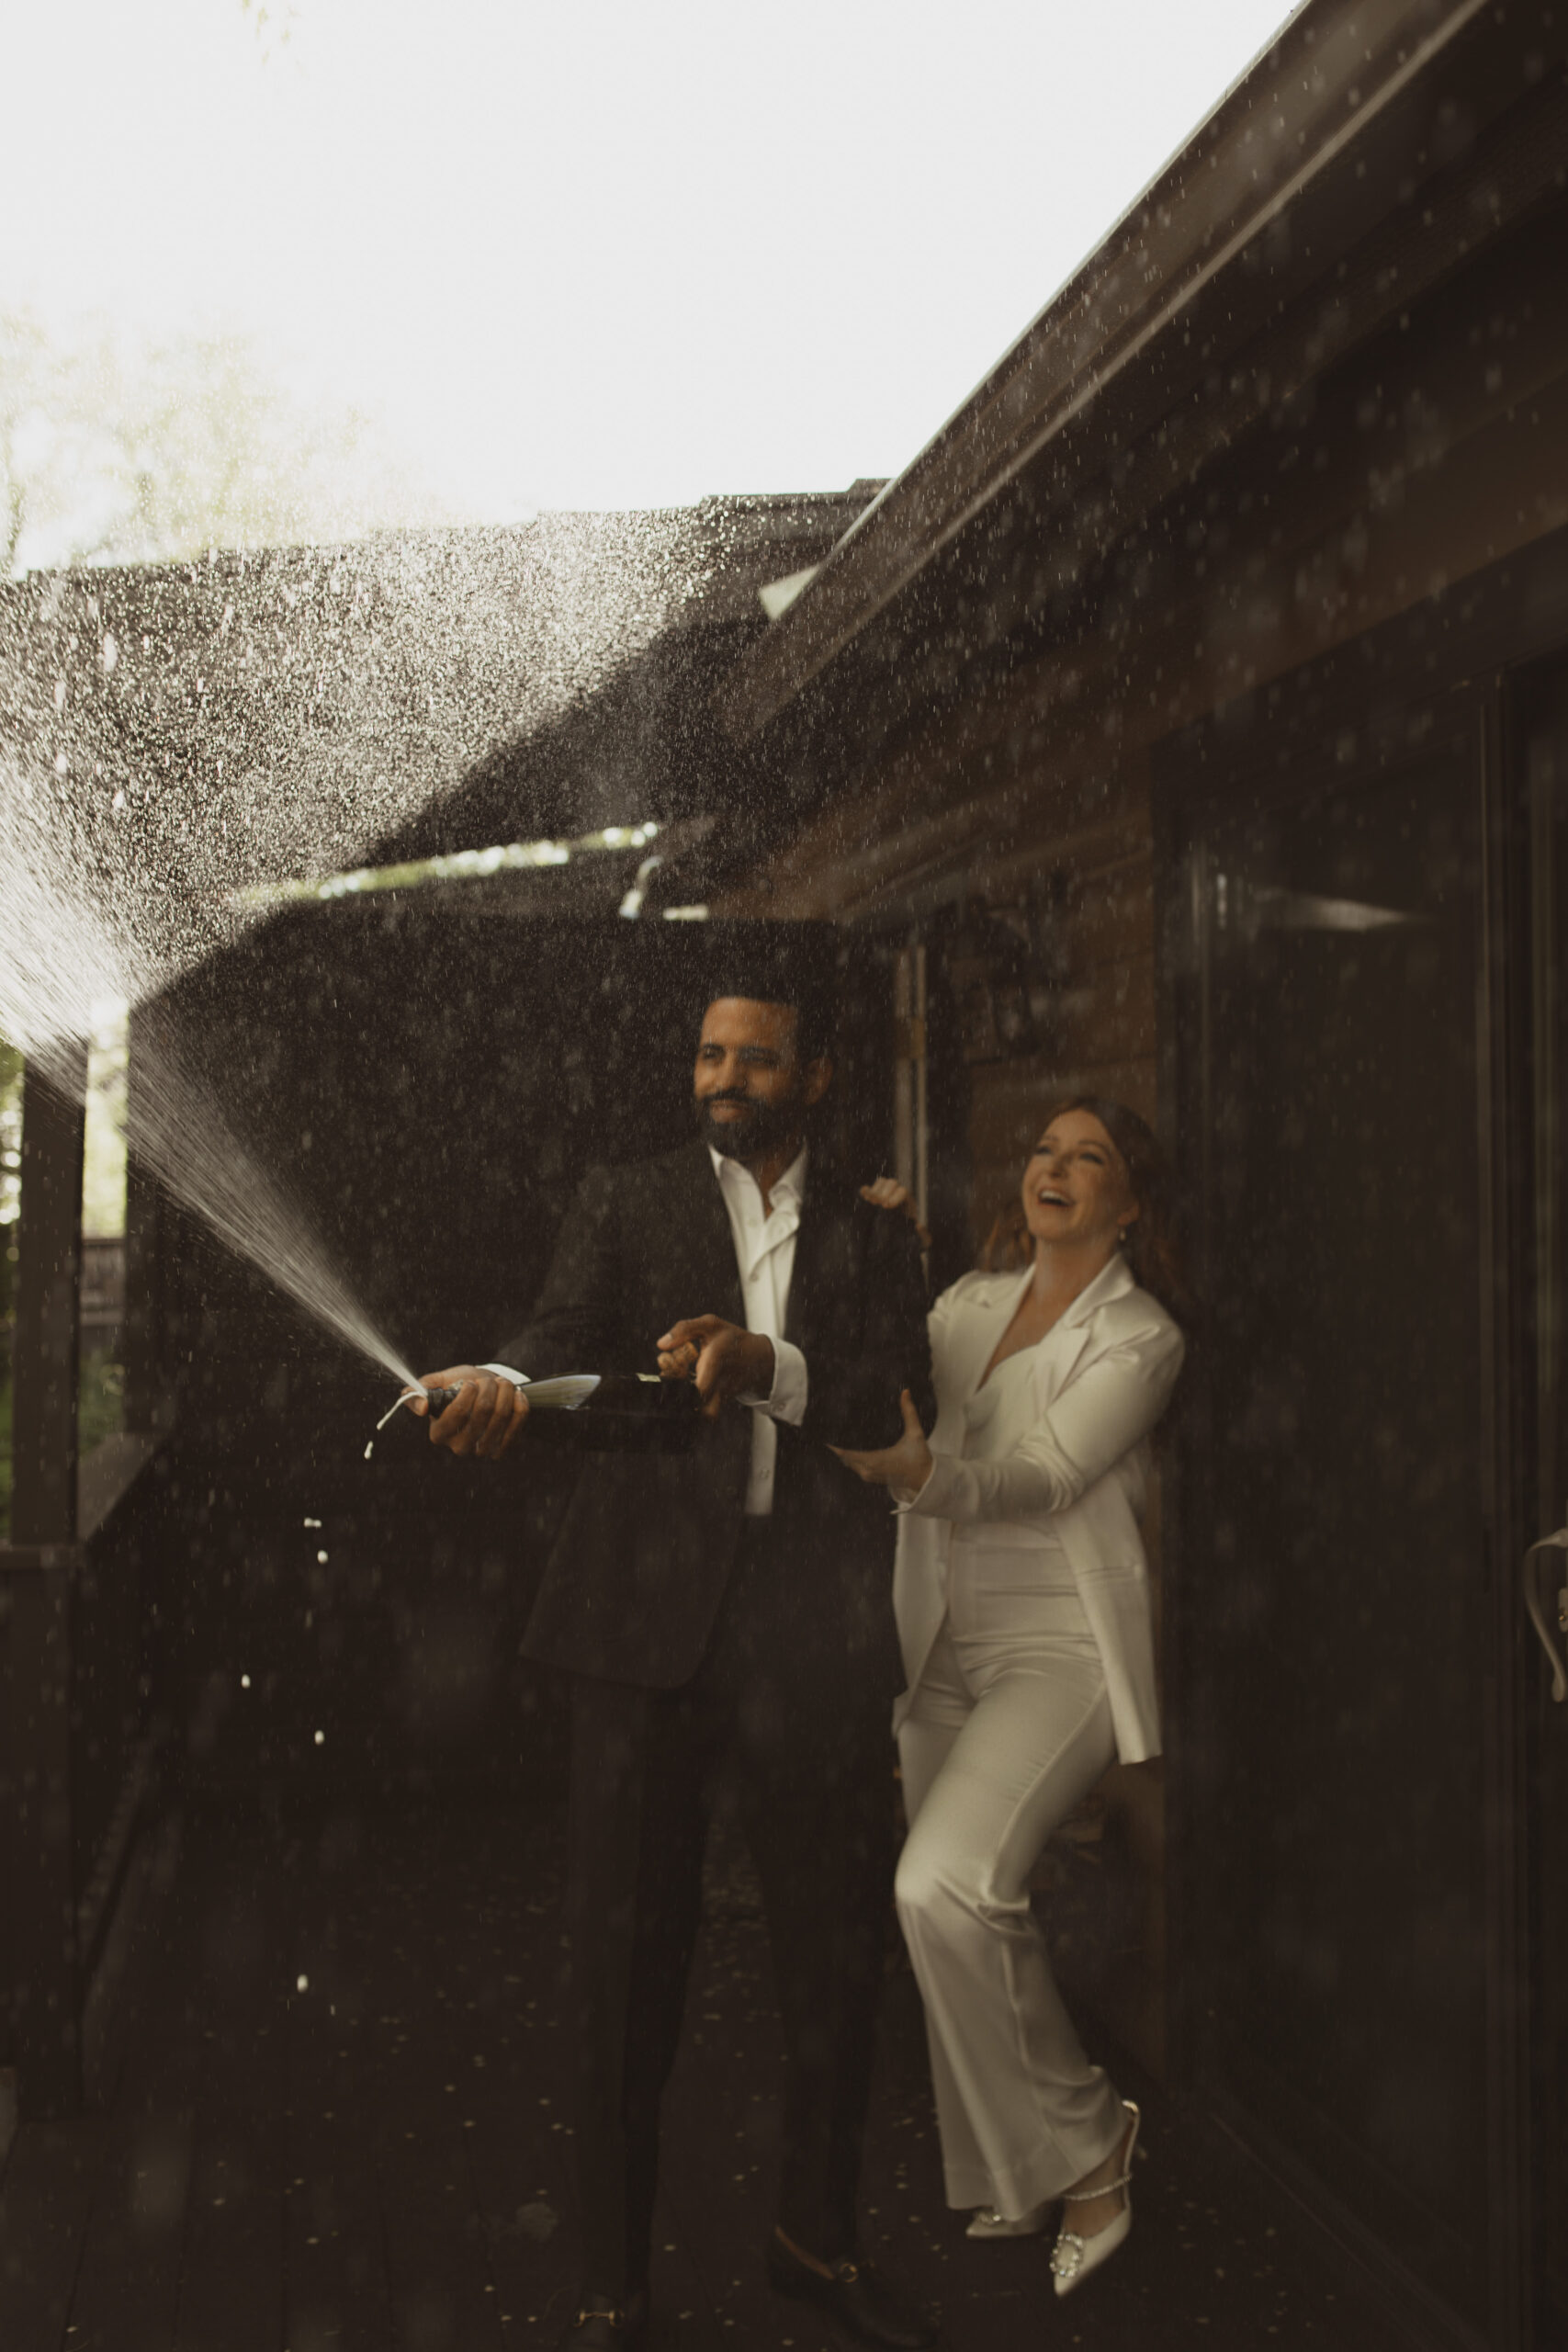 Happy couple spraying a champagne bottle